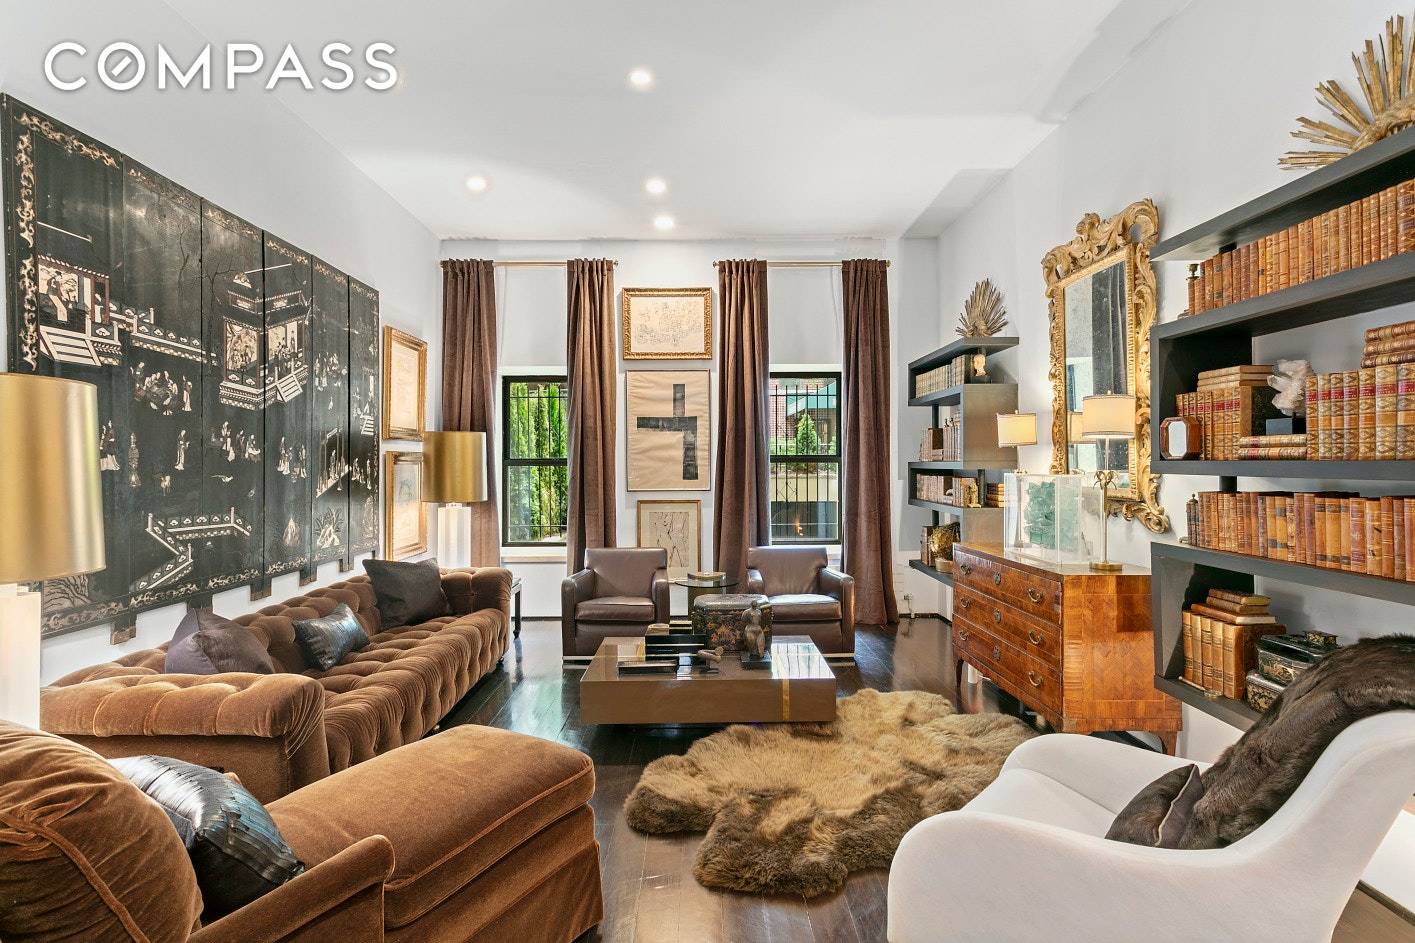 Exquisite Prewar over 3, 300 Sqft Three Bedroom Plus Home Office Triplex Townhouse right off Park Avenue offering for rent.